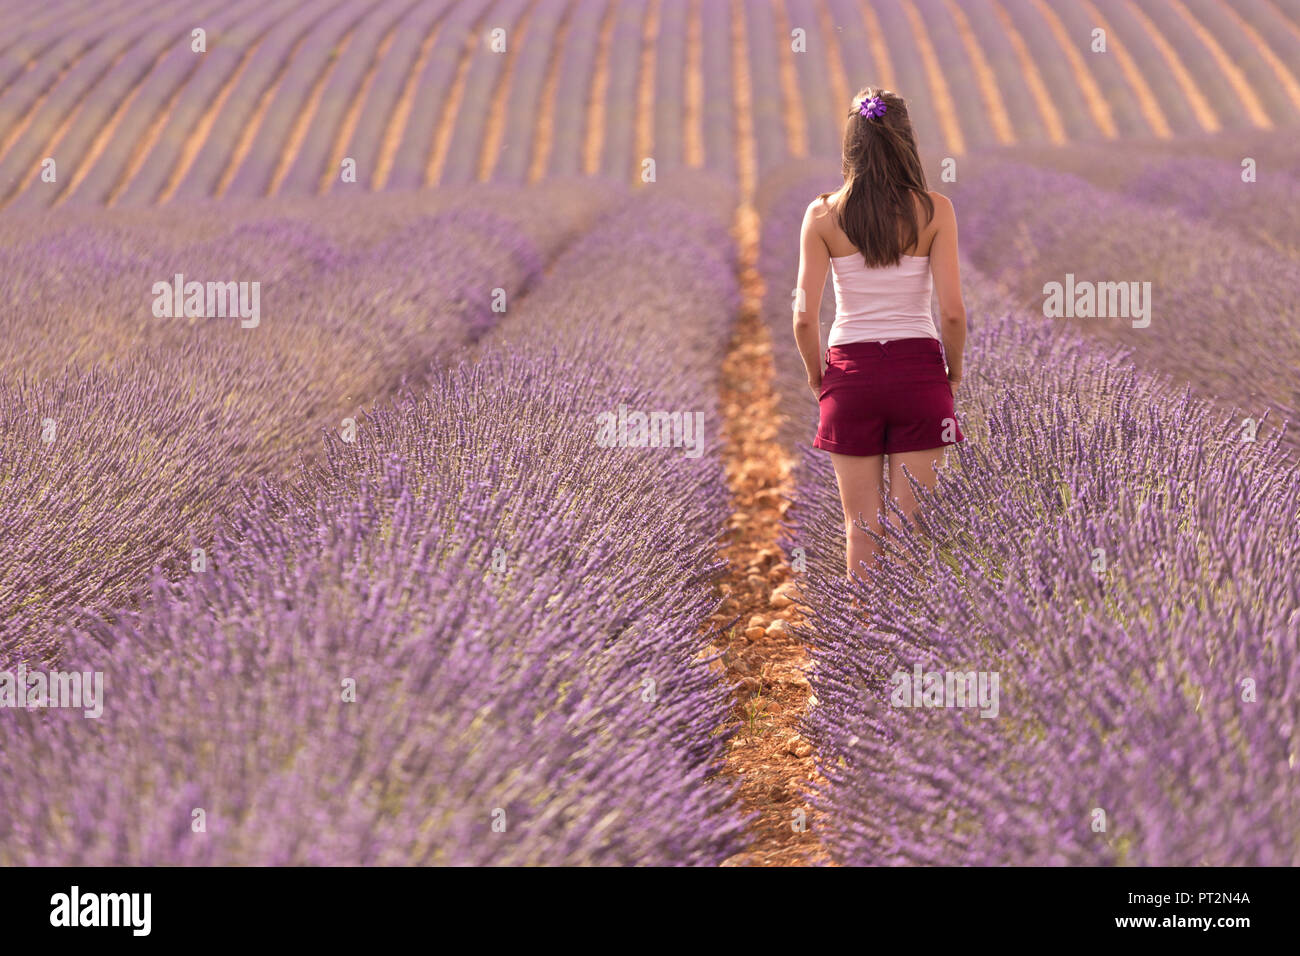 Brunette woman in white shirt and red shorts in a lavender field, valensole, provence, france Stock Photo